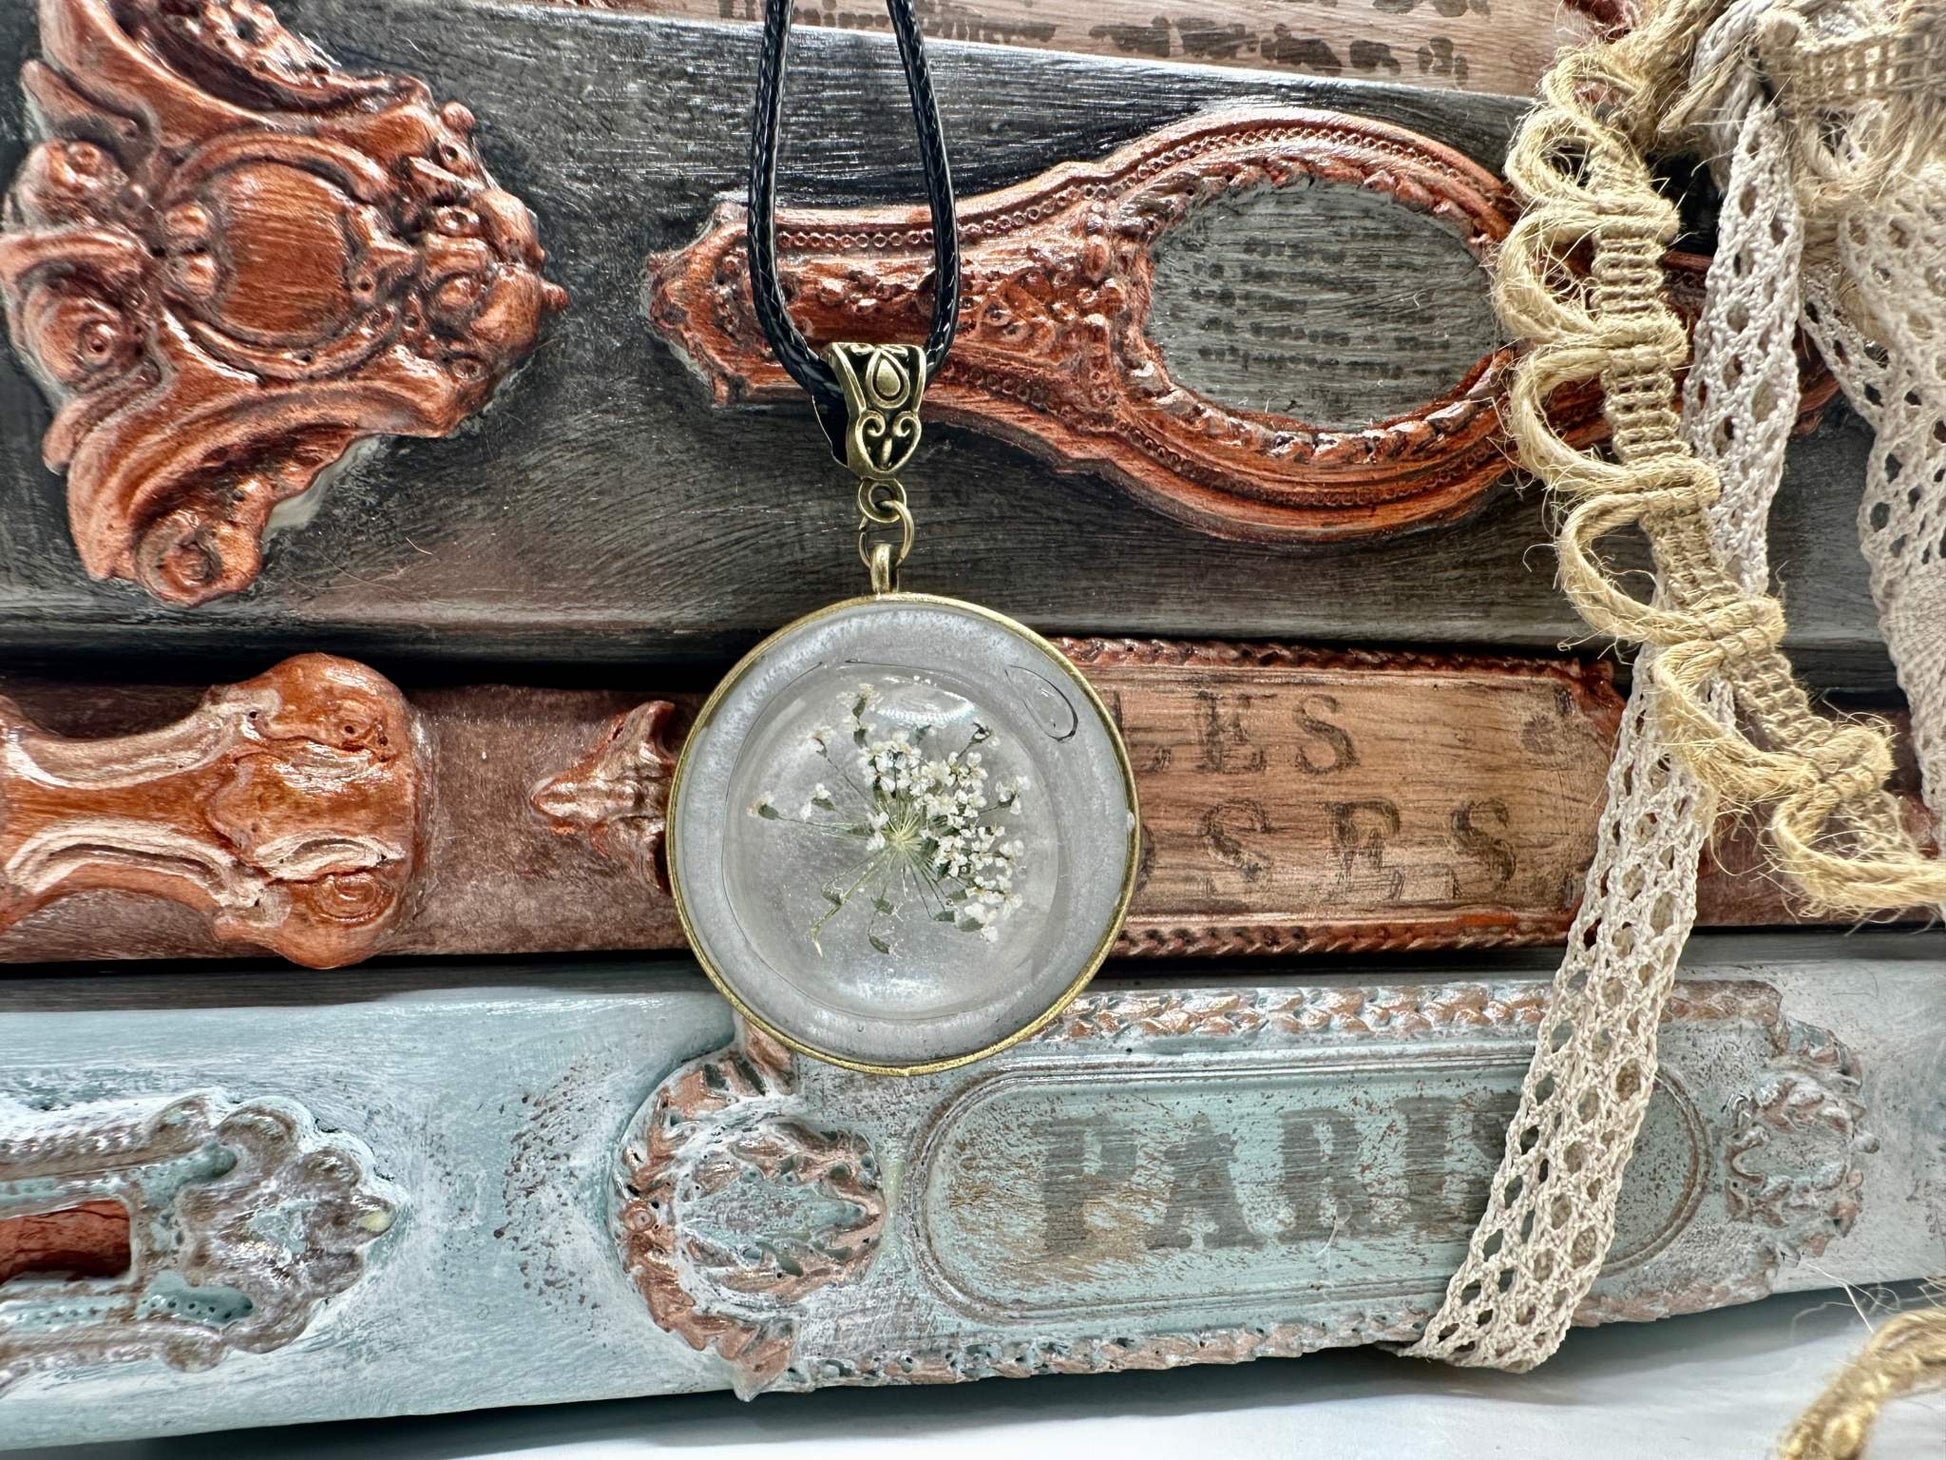 Queen Anne's Lace Handmade Necklace - Inspired by Mother Nature